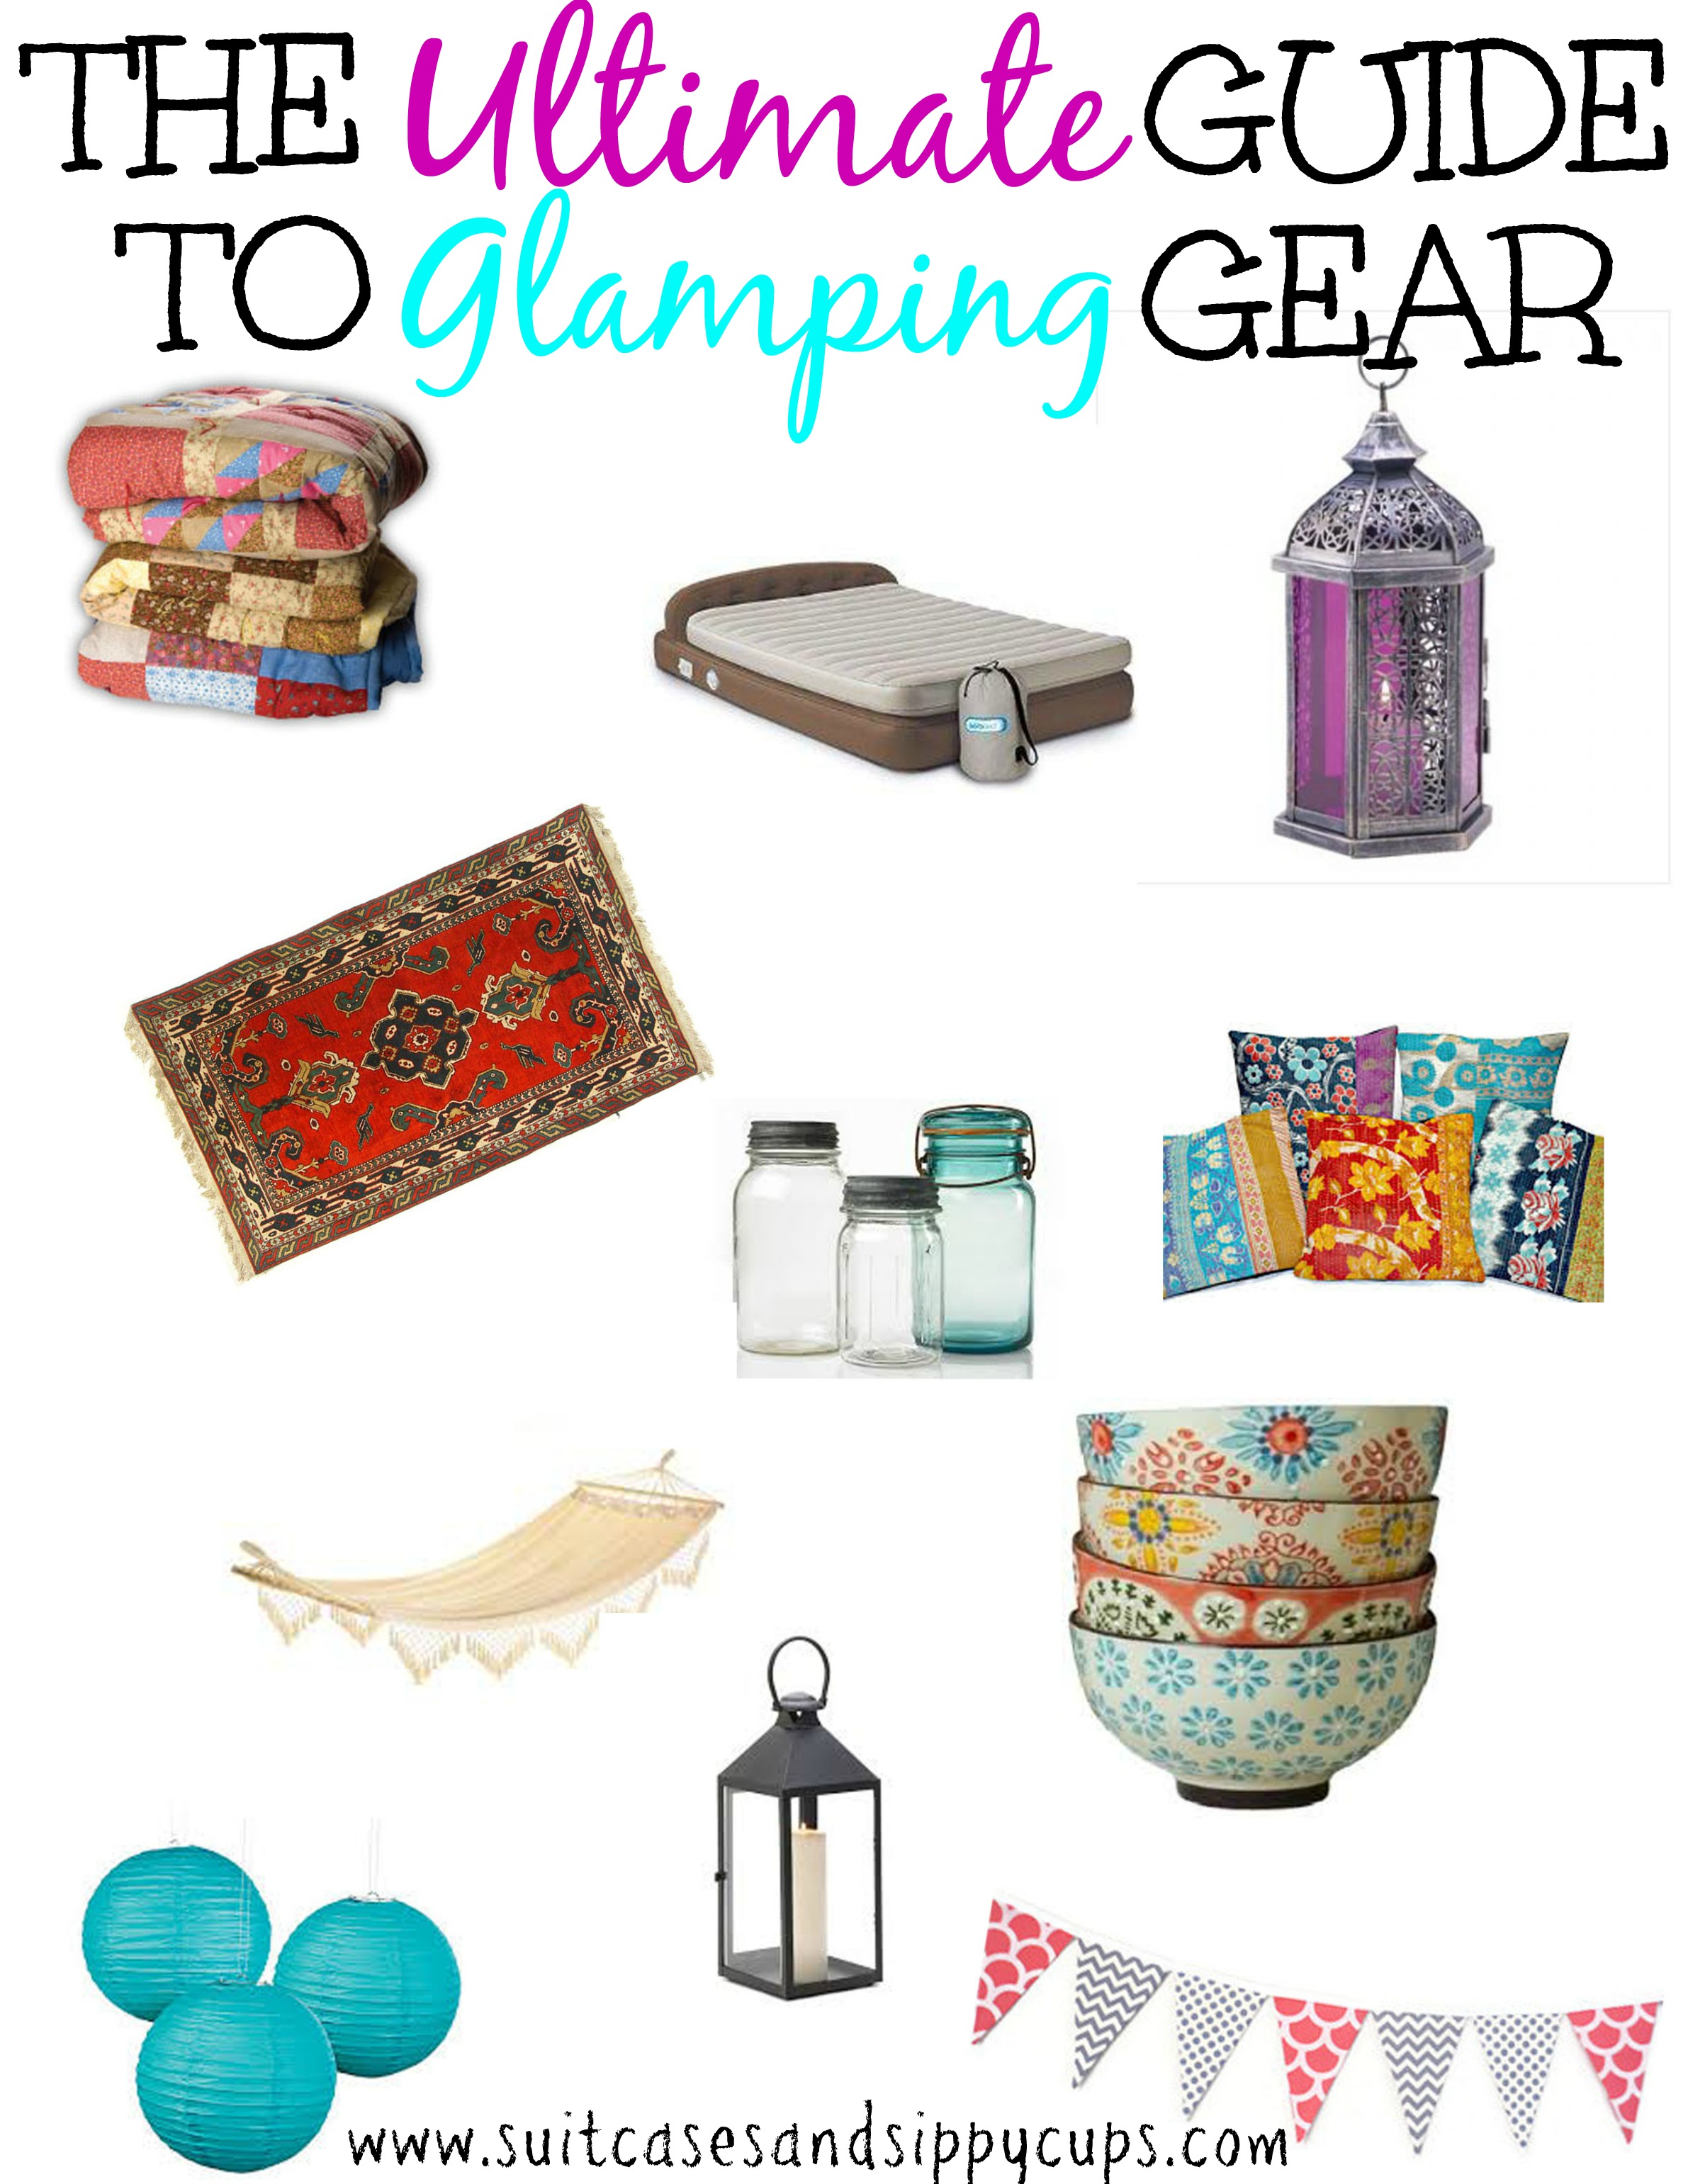 http://www.suitcasesandsippycups.com/wp-content/uploads/2015/07/glamping-ultimate-guide.jpg